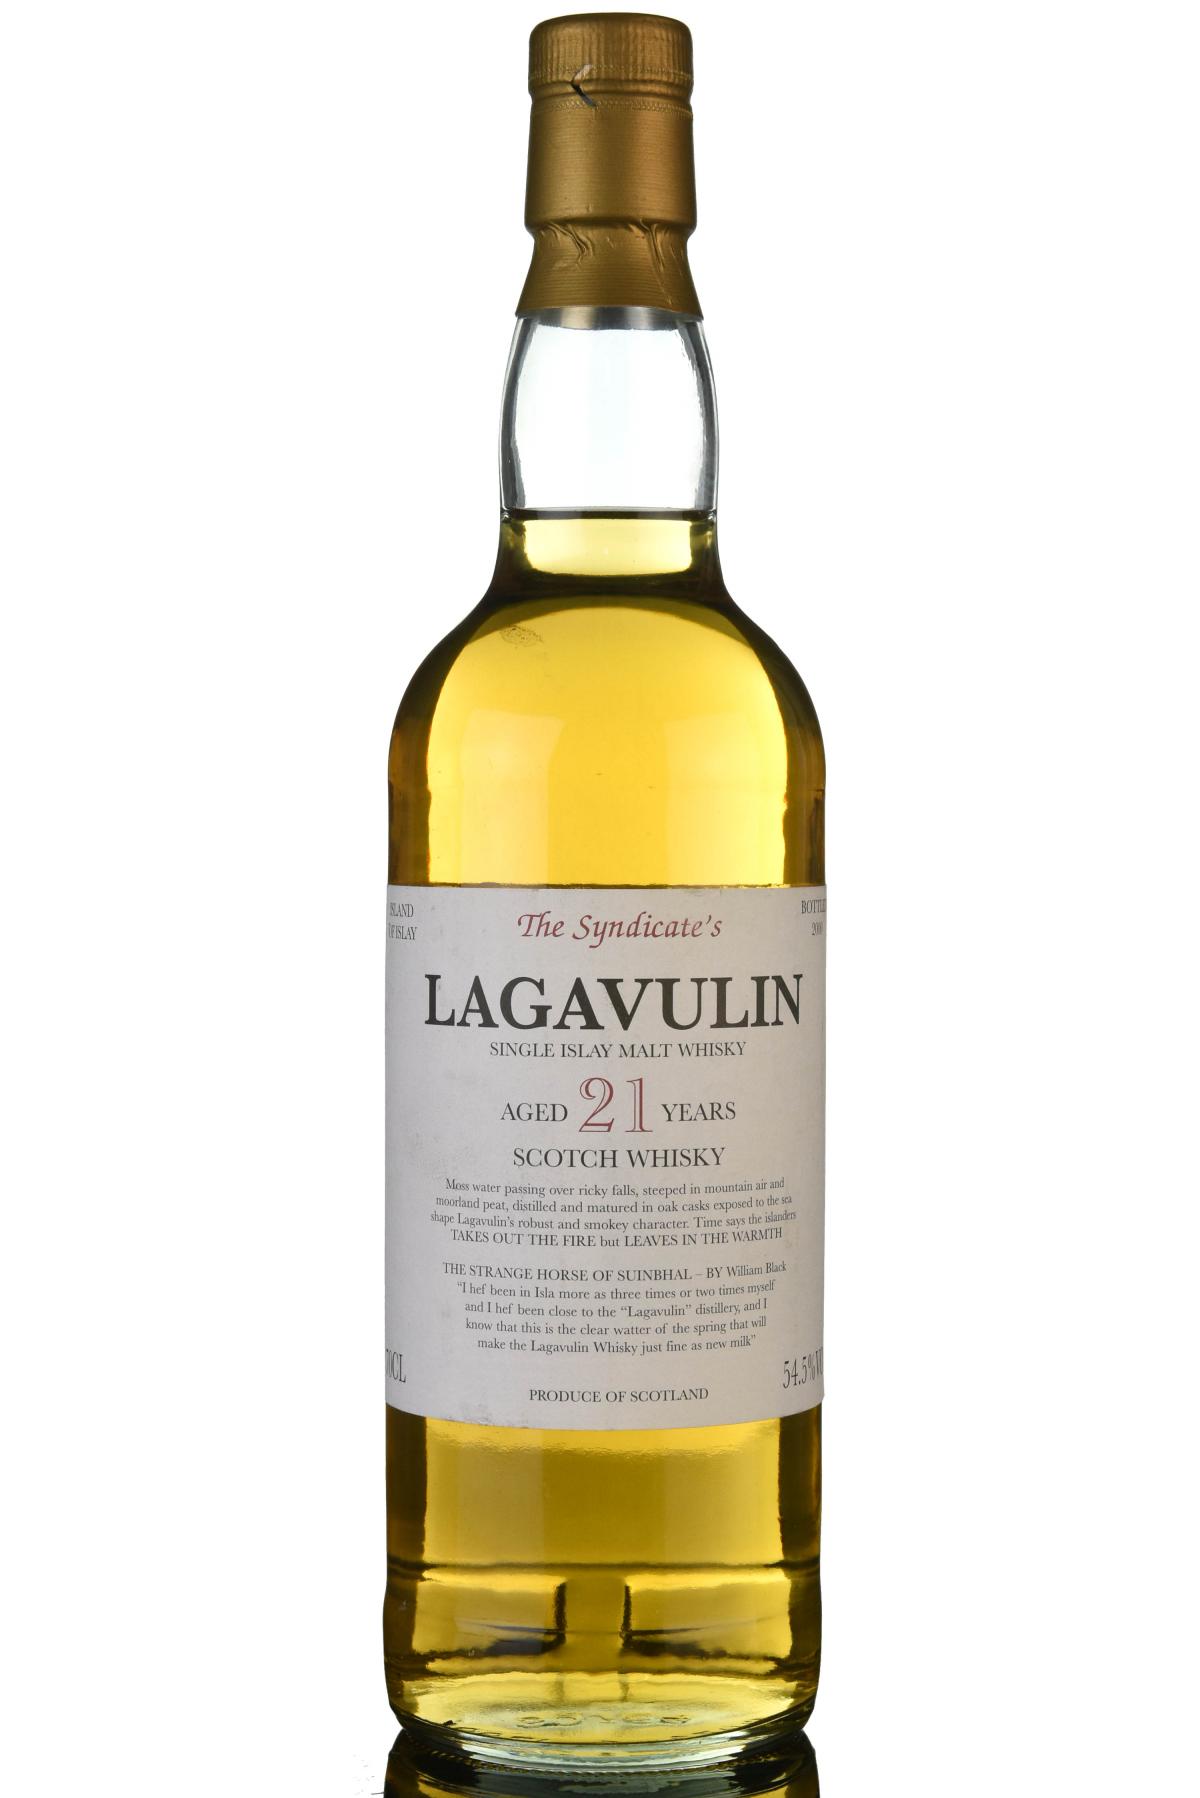 Lagavulin 1979-2000 - 21 Year Old - The Syndicate